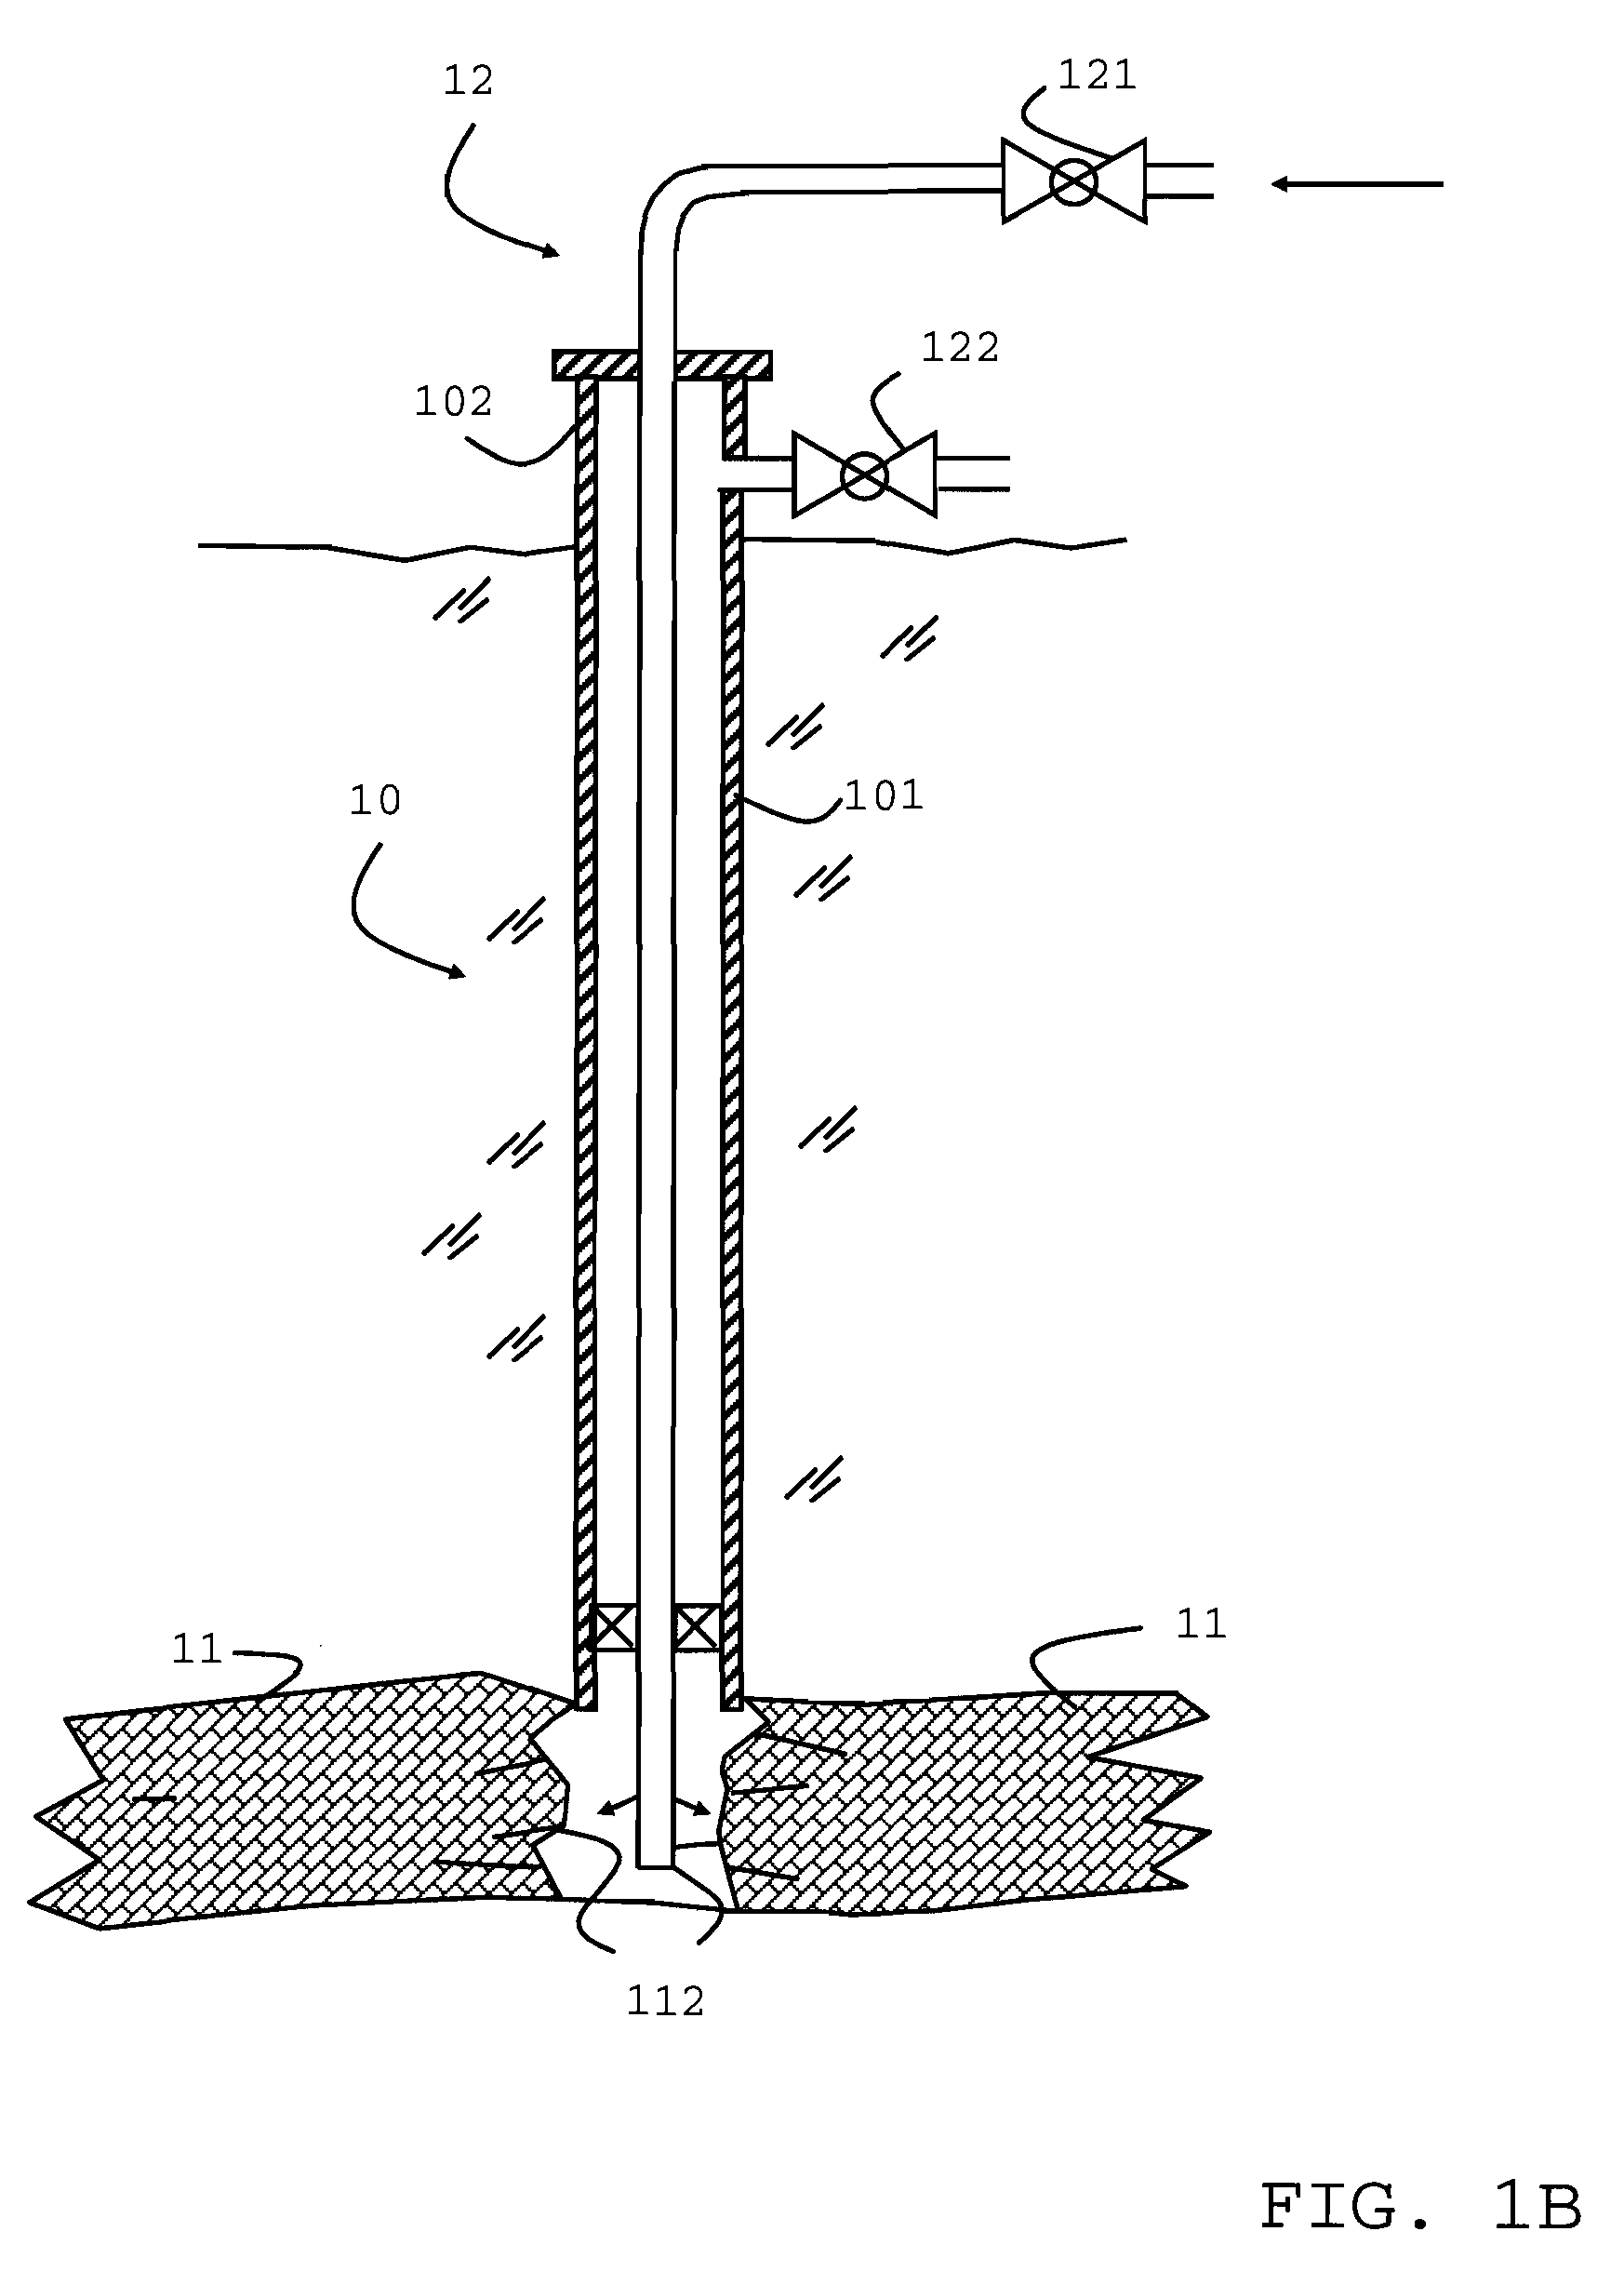 Method of fracturing a coalbed gas reservoir